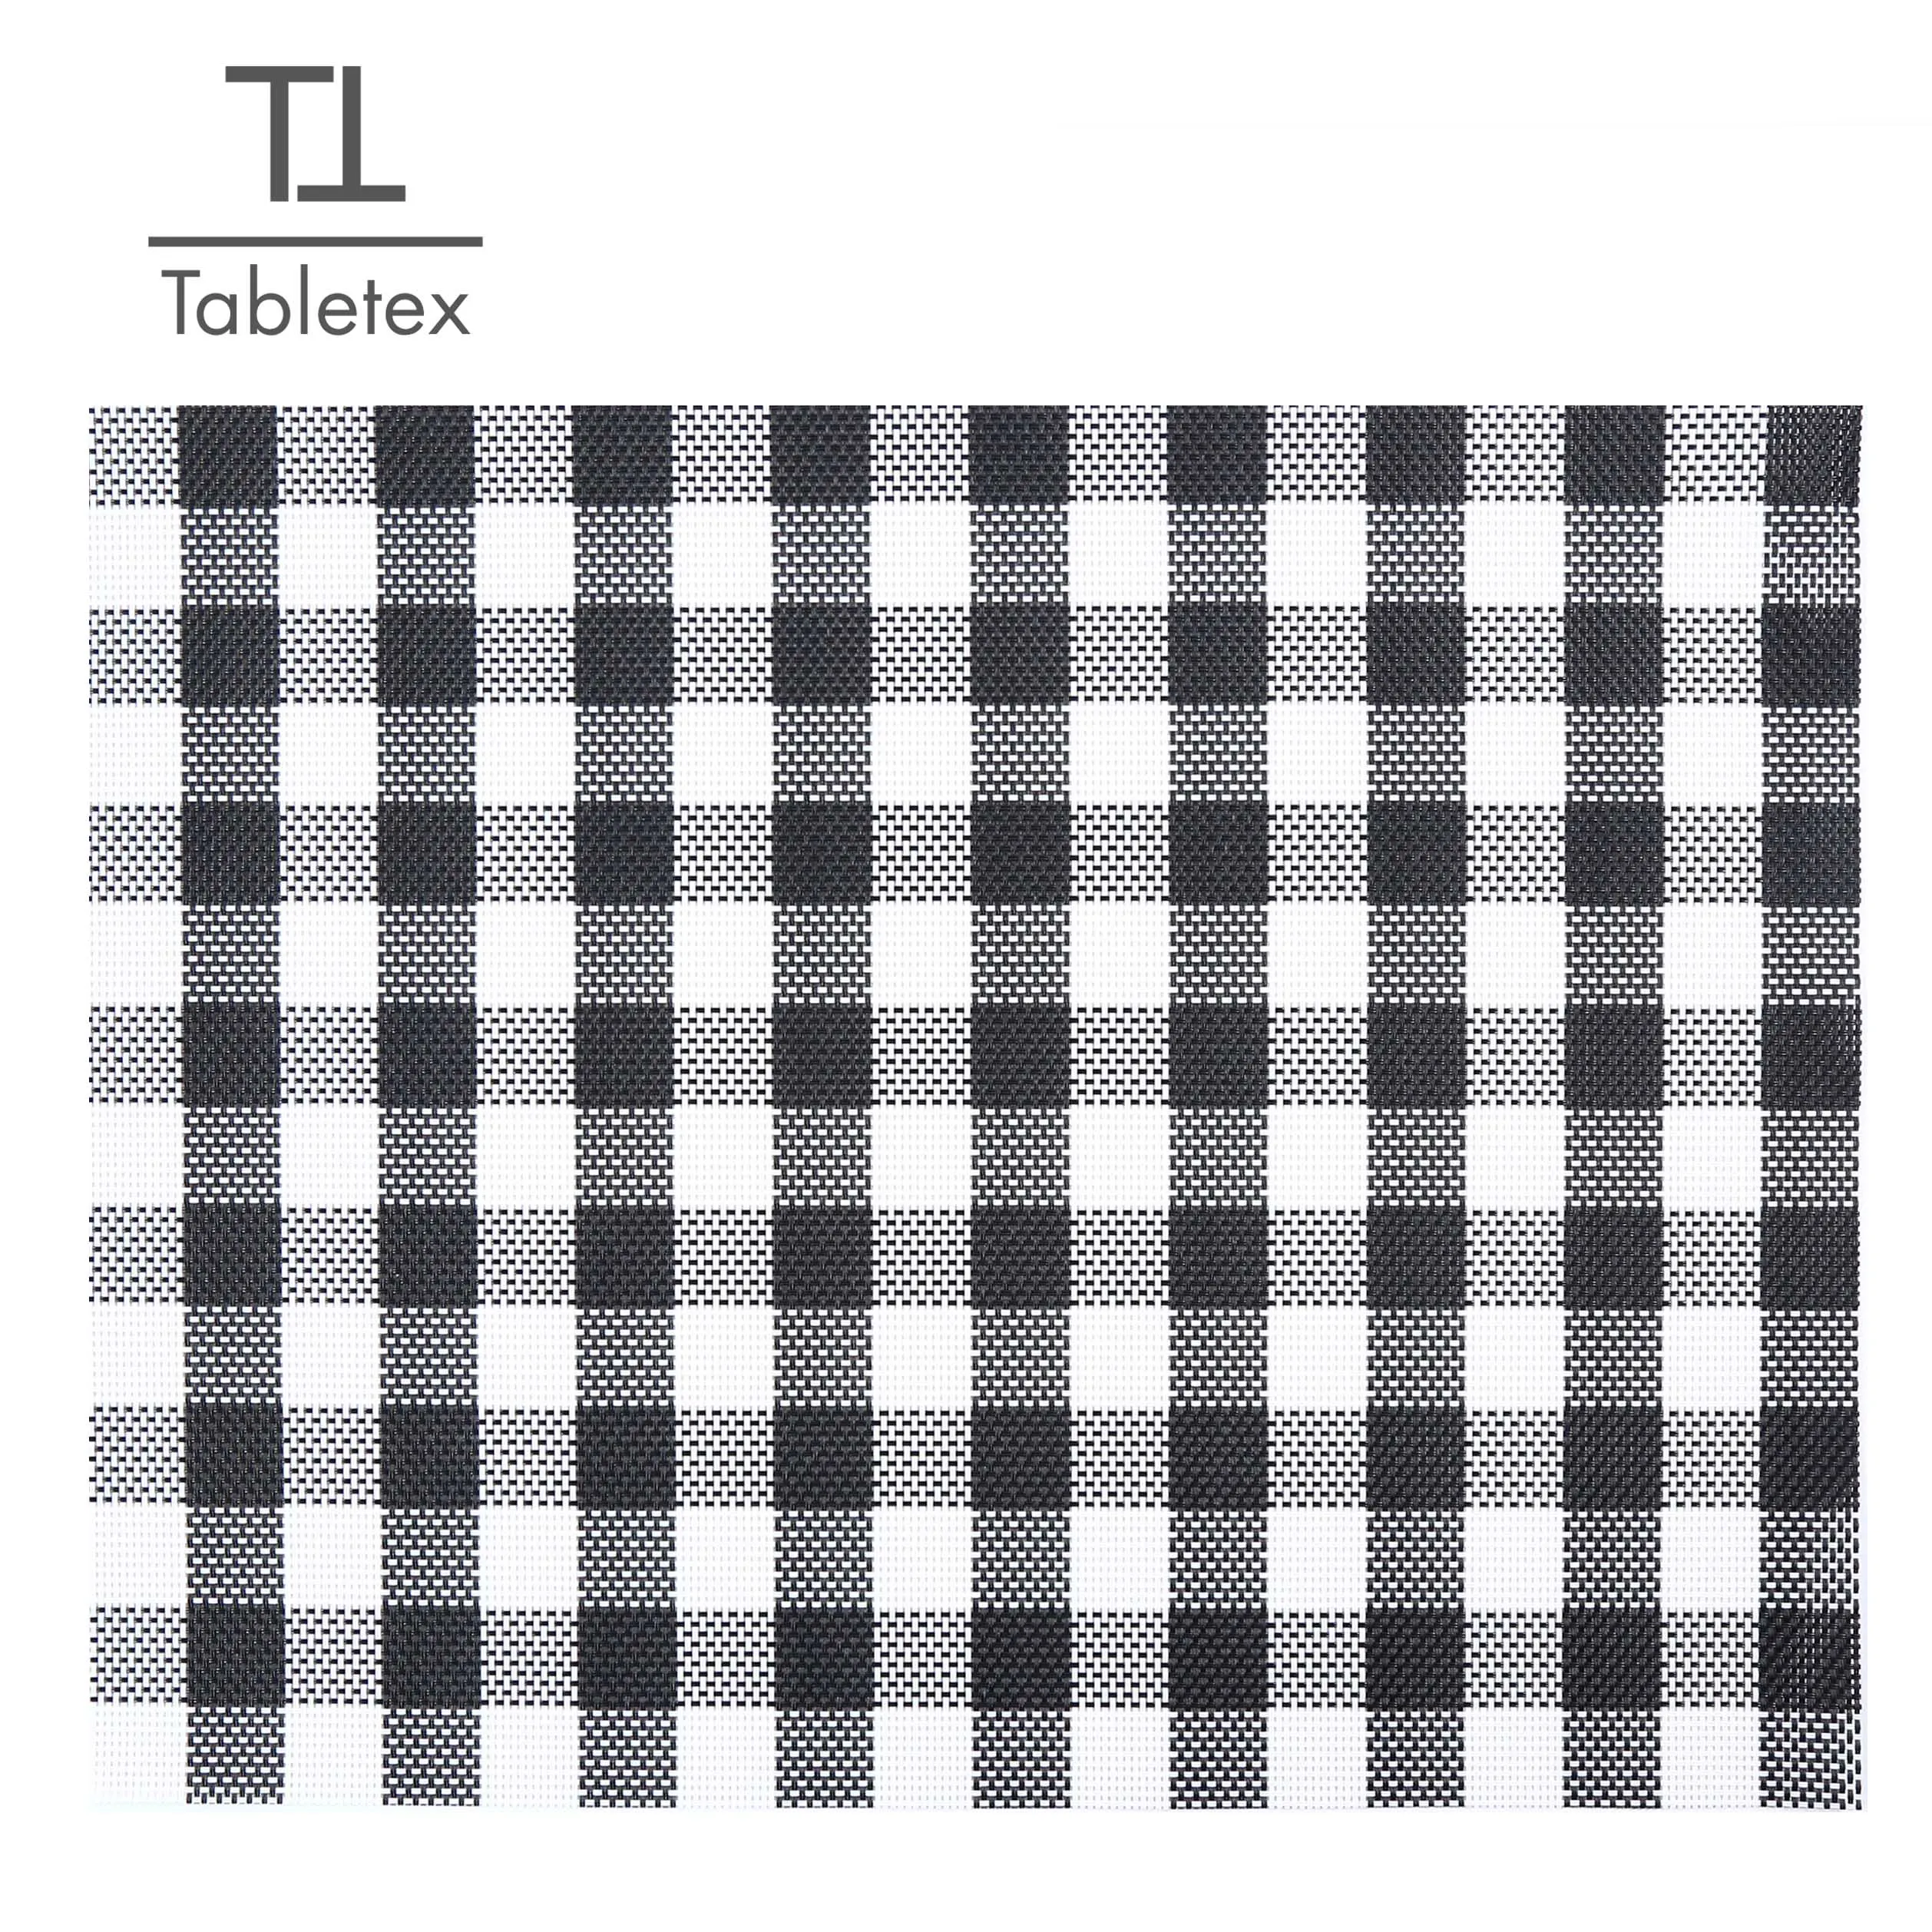 

Tabletex Basketweave Vinyl Wedding Placemats New Design Dinner Set Woven Vinyl Table Mats for Kitchen and Dining Room